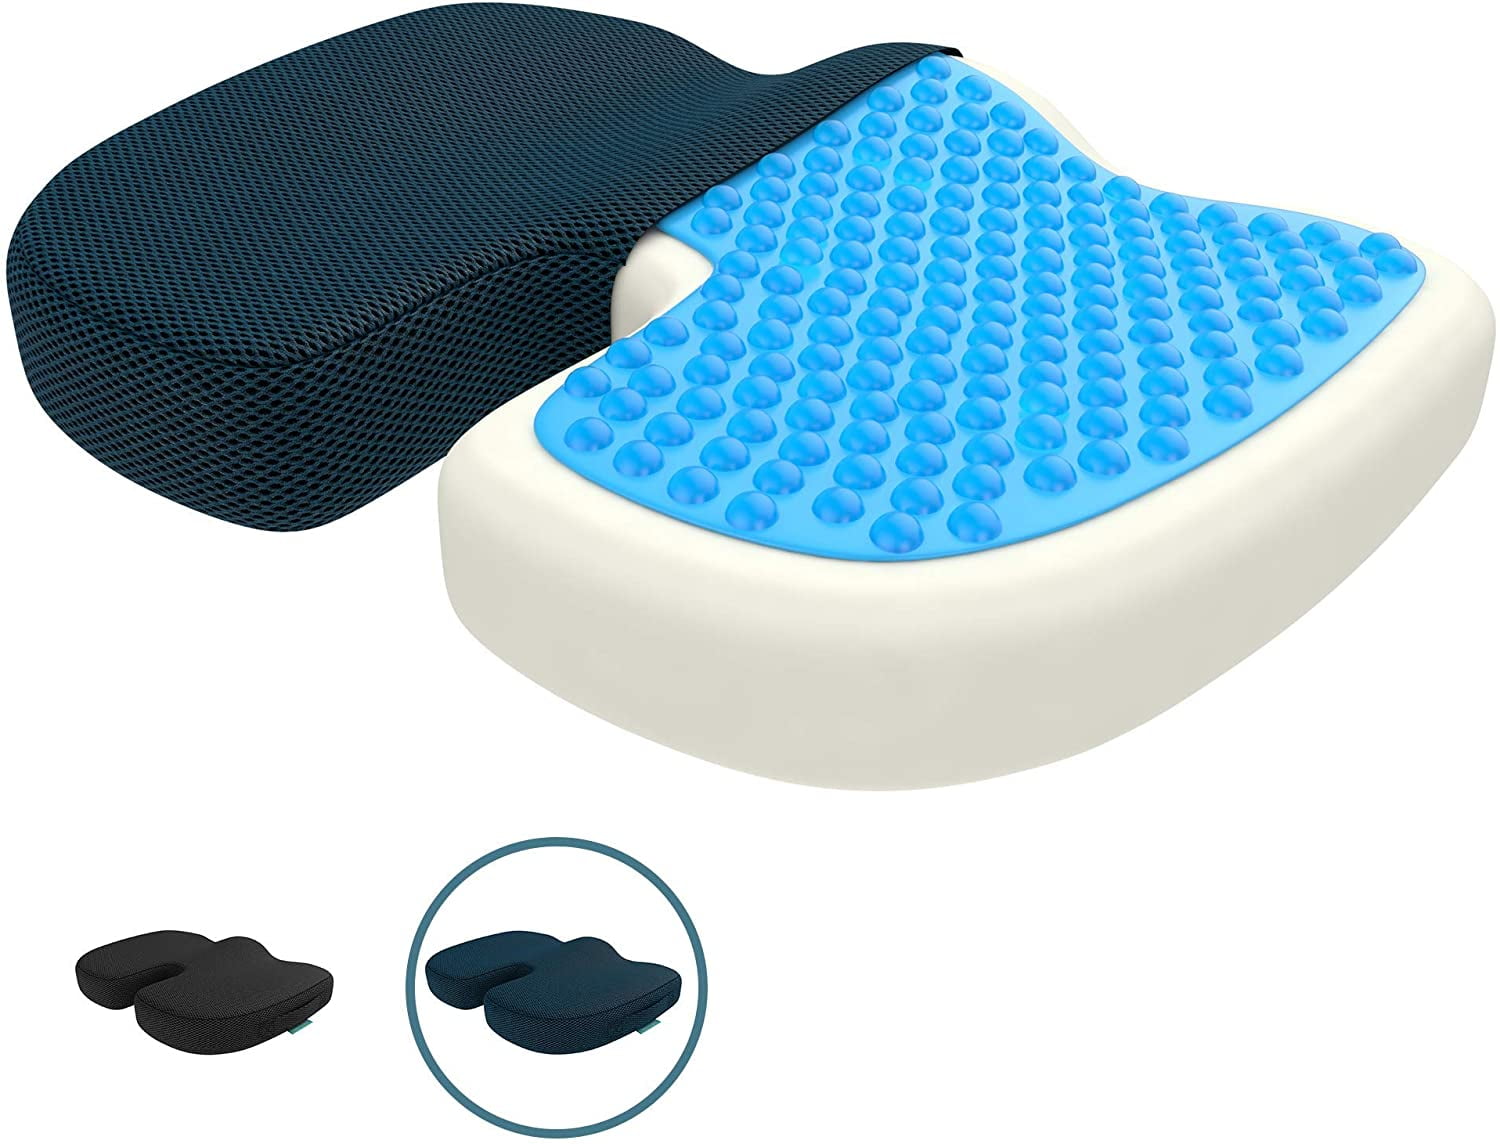 Anti-Slip Orthopedic Gel and Memory Foam Pad to Relieve Tailbone Pain Breathable mesh Blue Reinforcement Pad Sciatica/Back Pain Cushion Office Chair Car Cushion 